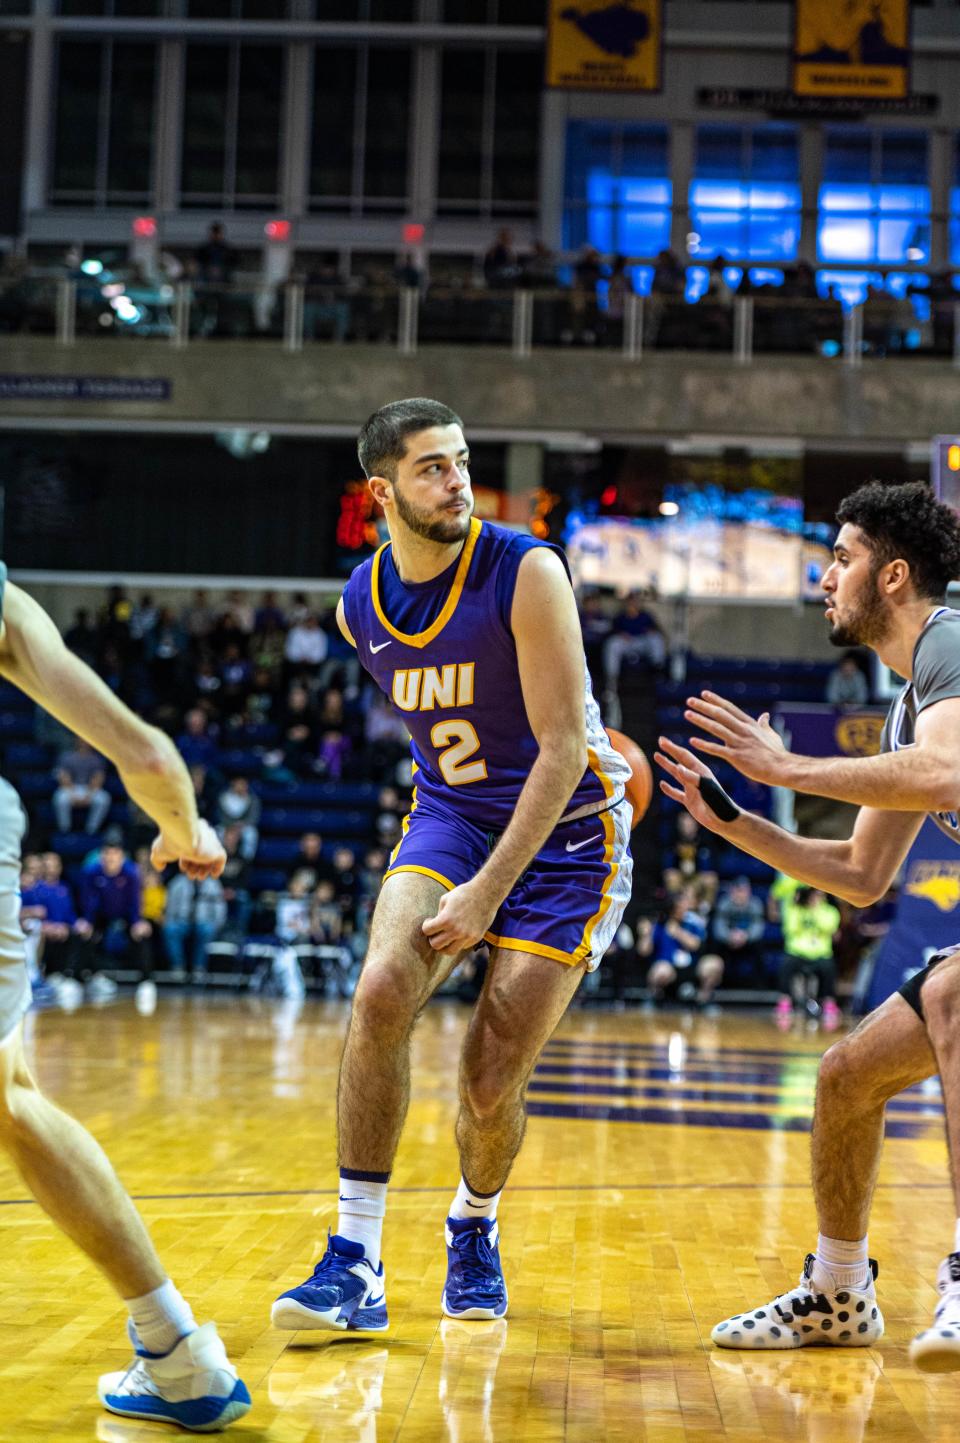 UNI basketball's Ege Peksari attempts to make a pass while Drake's Okay Djamgouz defends. Peksari and Djamgouz are the only Turkish players in the Missouri Valley Conference.